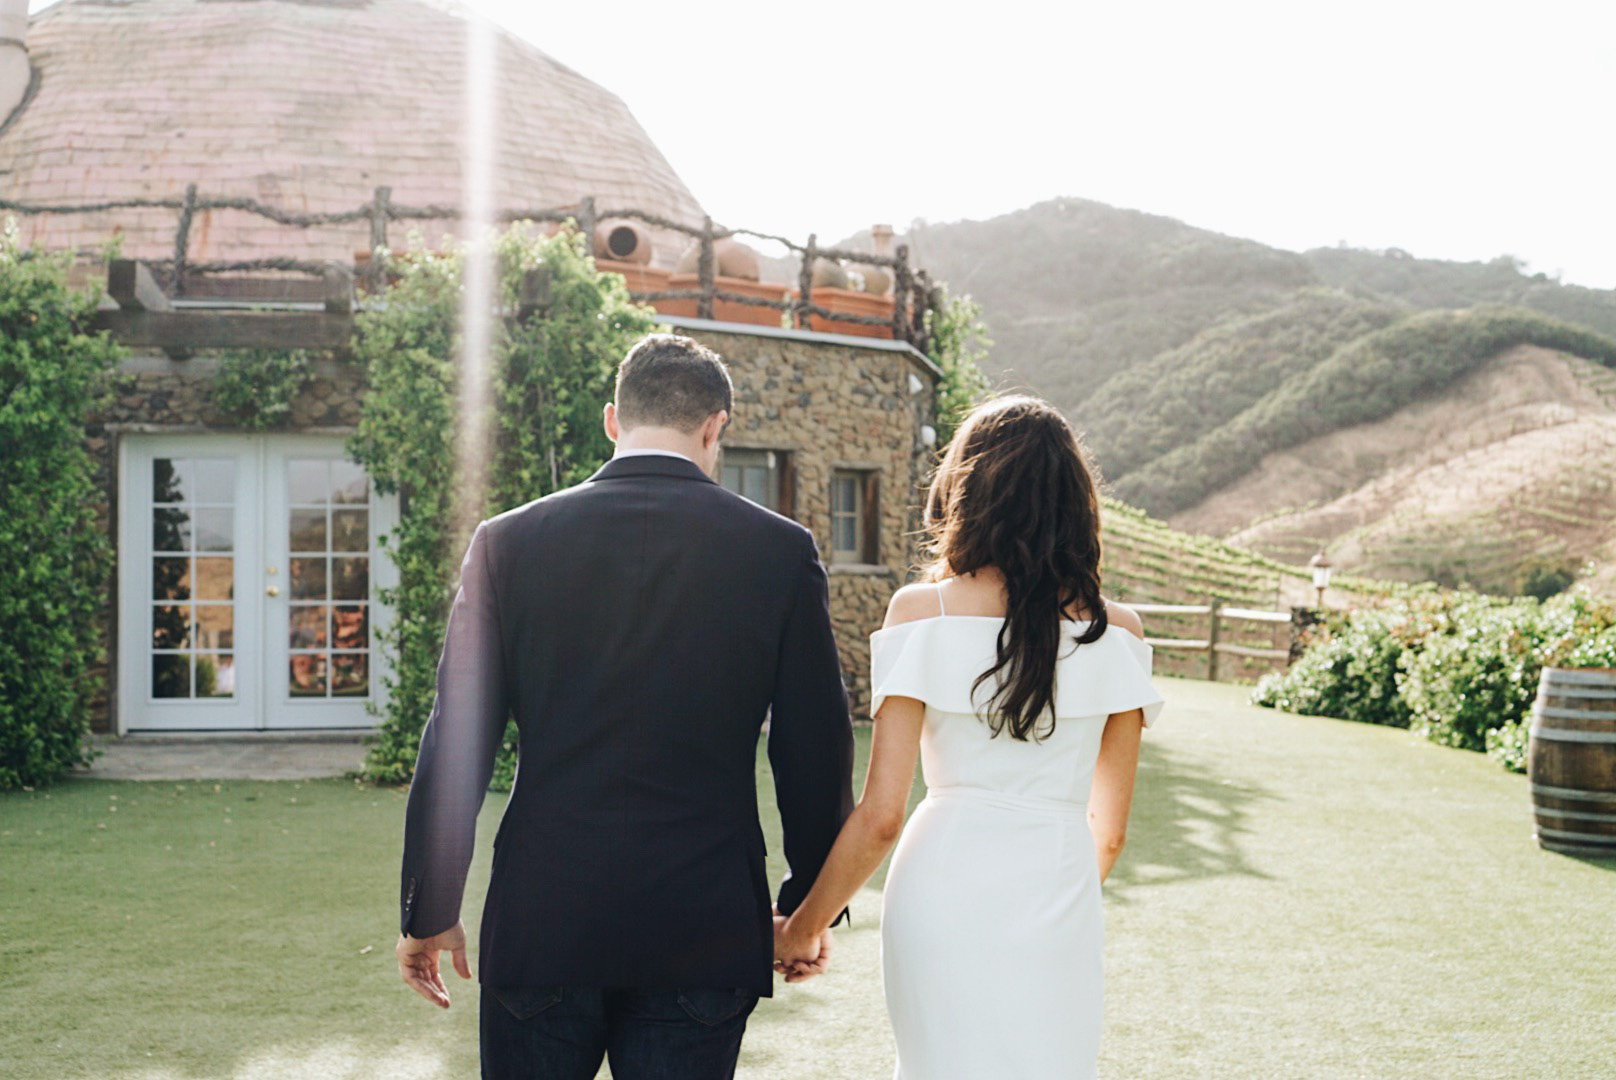 Jackie Roque and Luke Salas rehearsing their marriage at Saddlerock Ranch Vineyard The Dome in Malibu, California. 